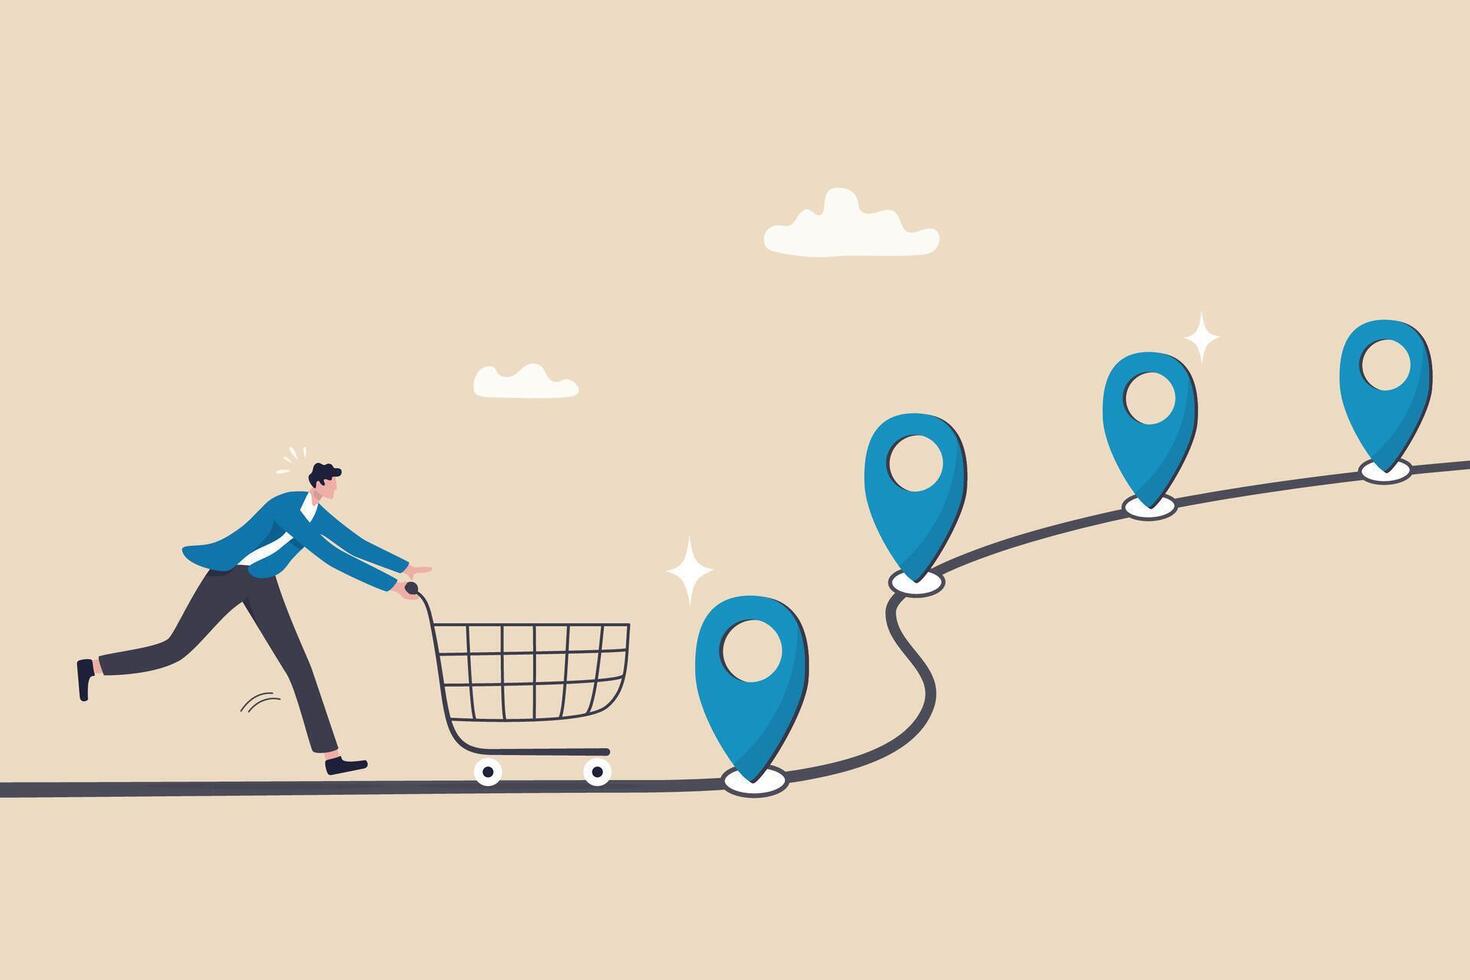 Customer journey, process or milestone for customer to experience until purchase product, marketing strategy analysis, advertising concept, man with trolley shopping cart on customer journey map. vector